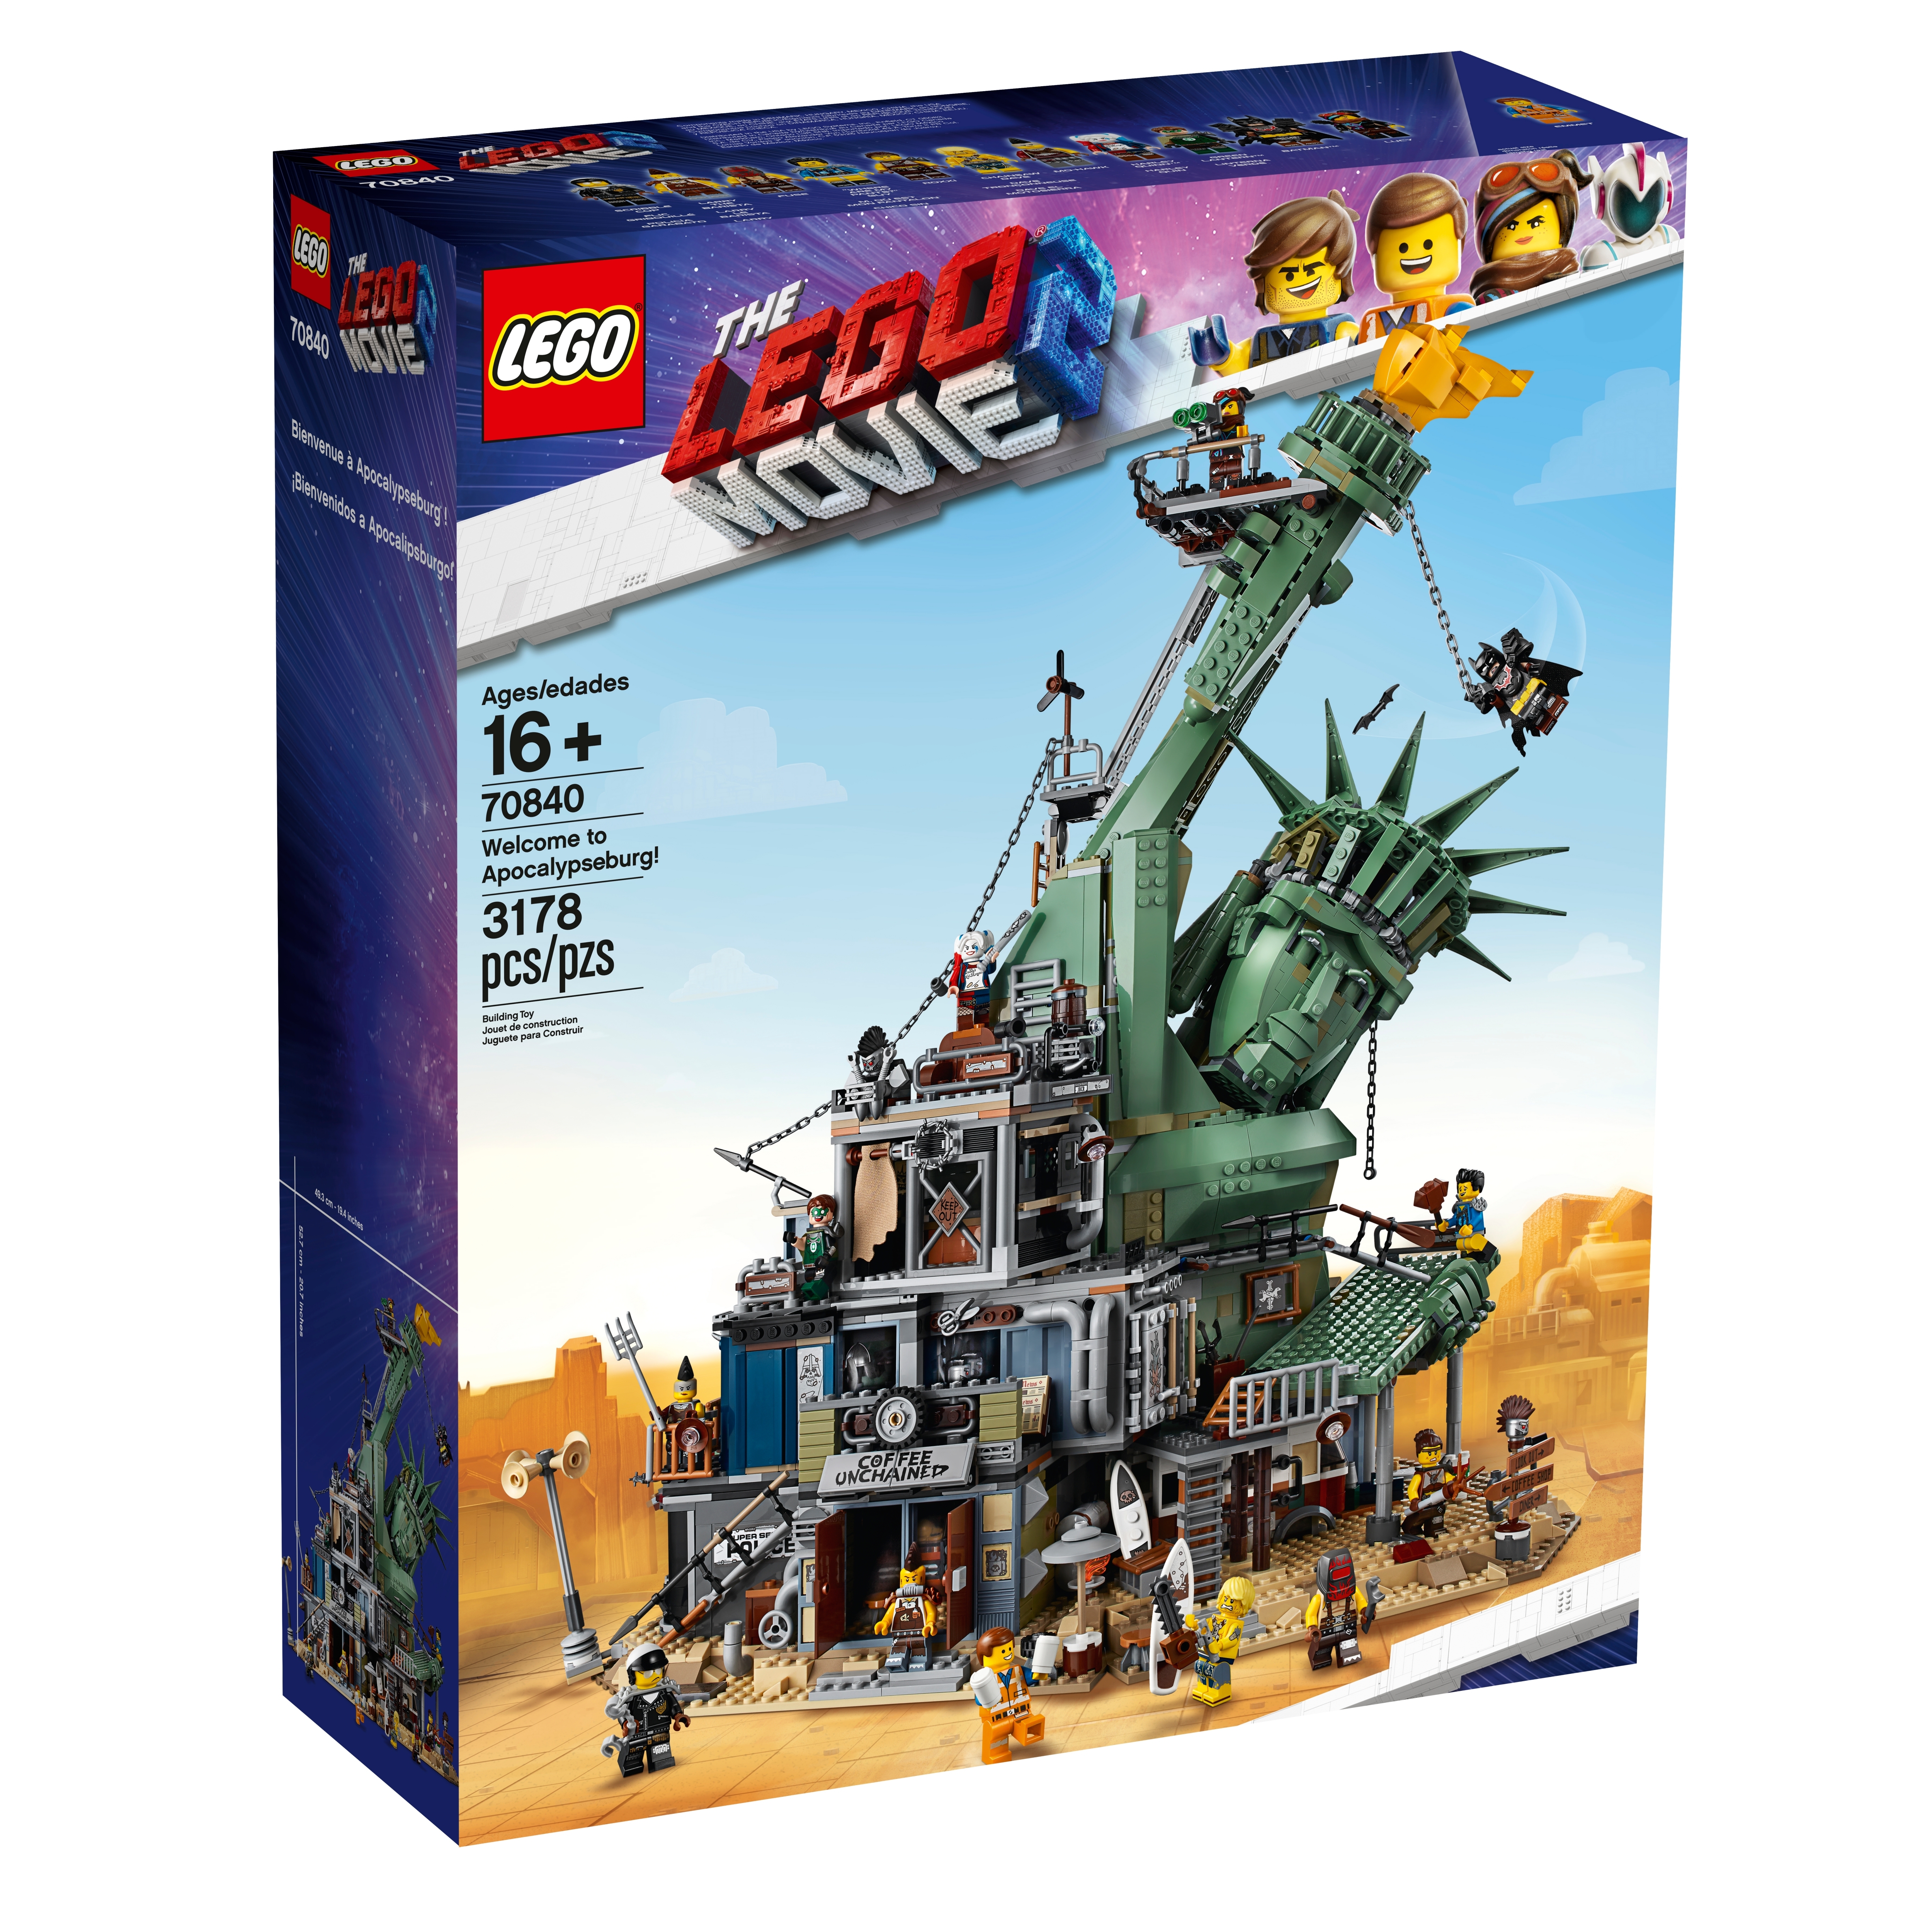 the biggest lego set you can buy